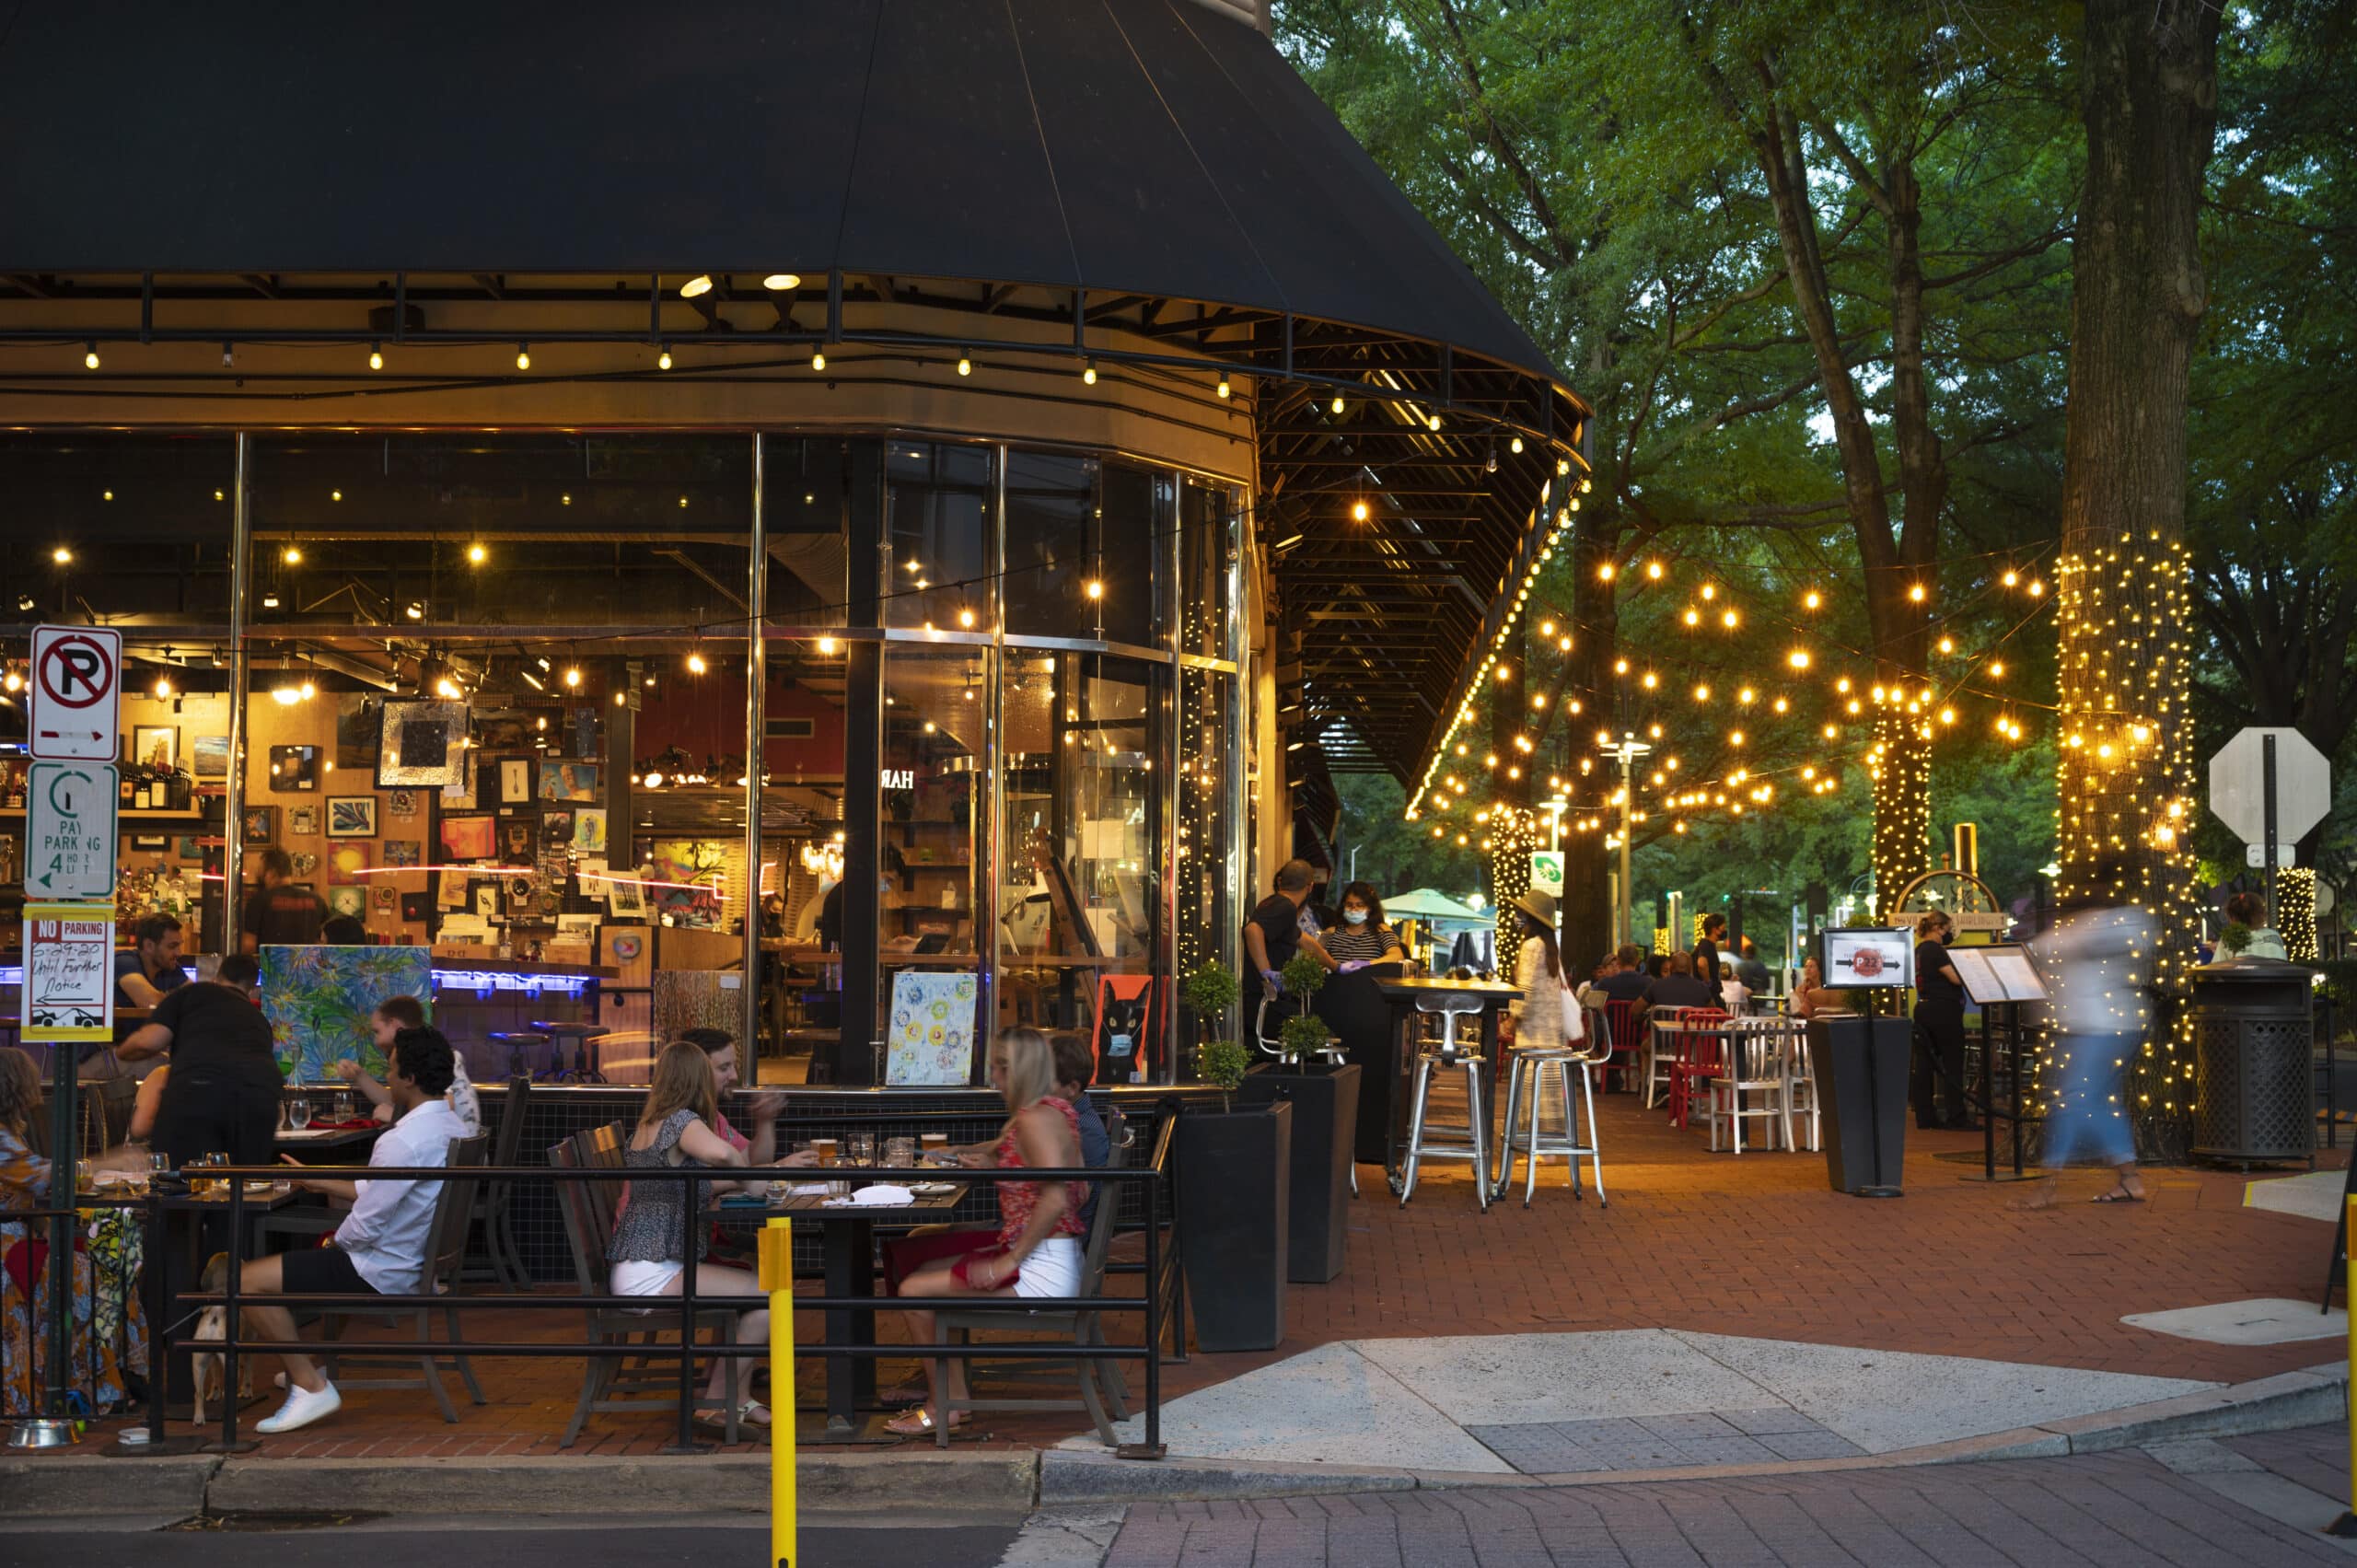 guests dine outside of a brightly-lit corner cafe at dusk with an assortment of artwork visible through cafe window